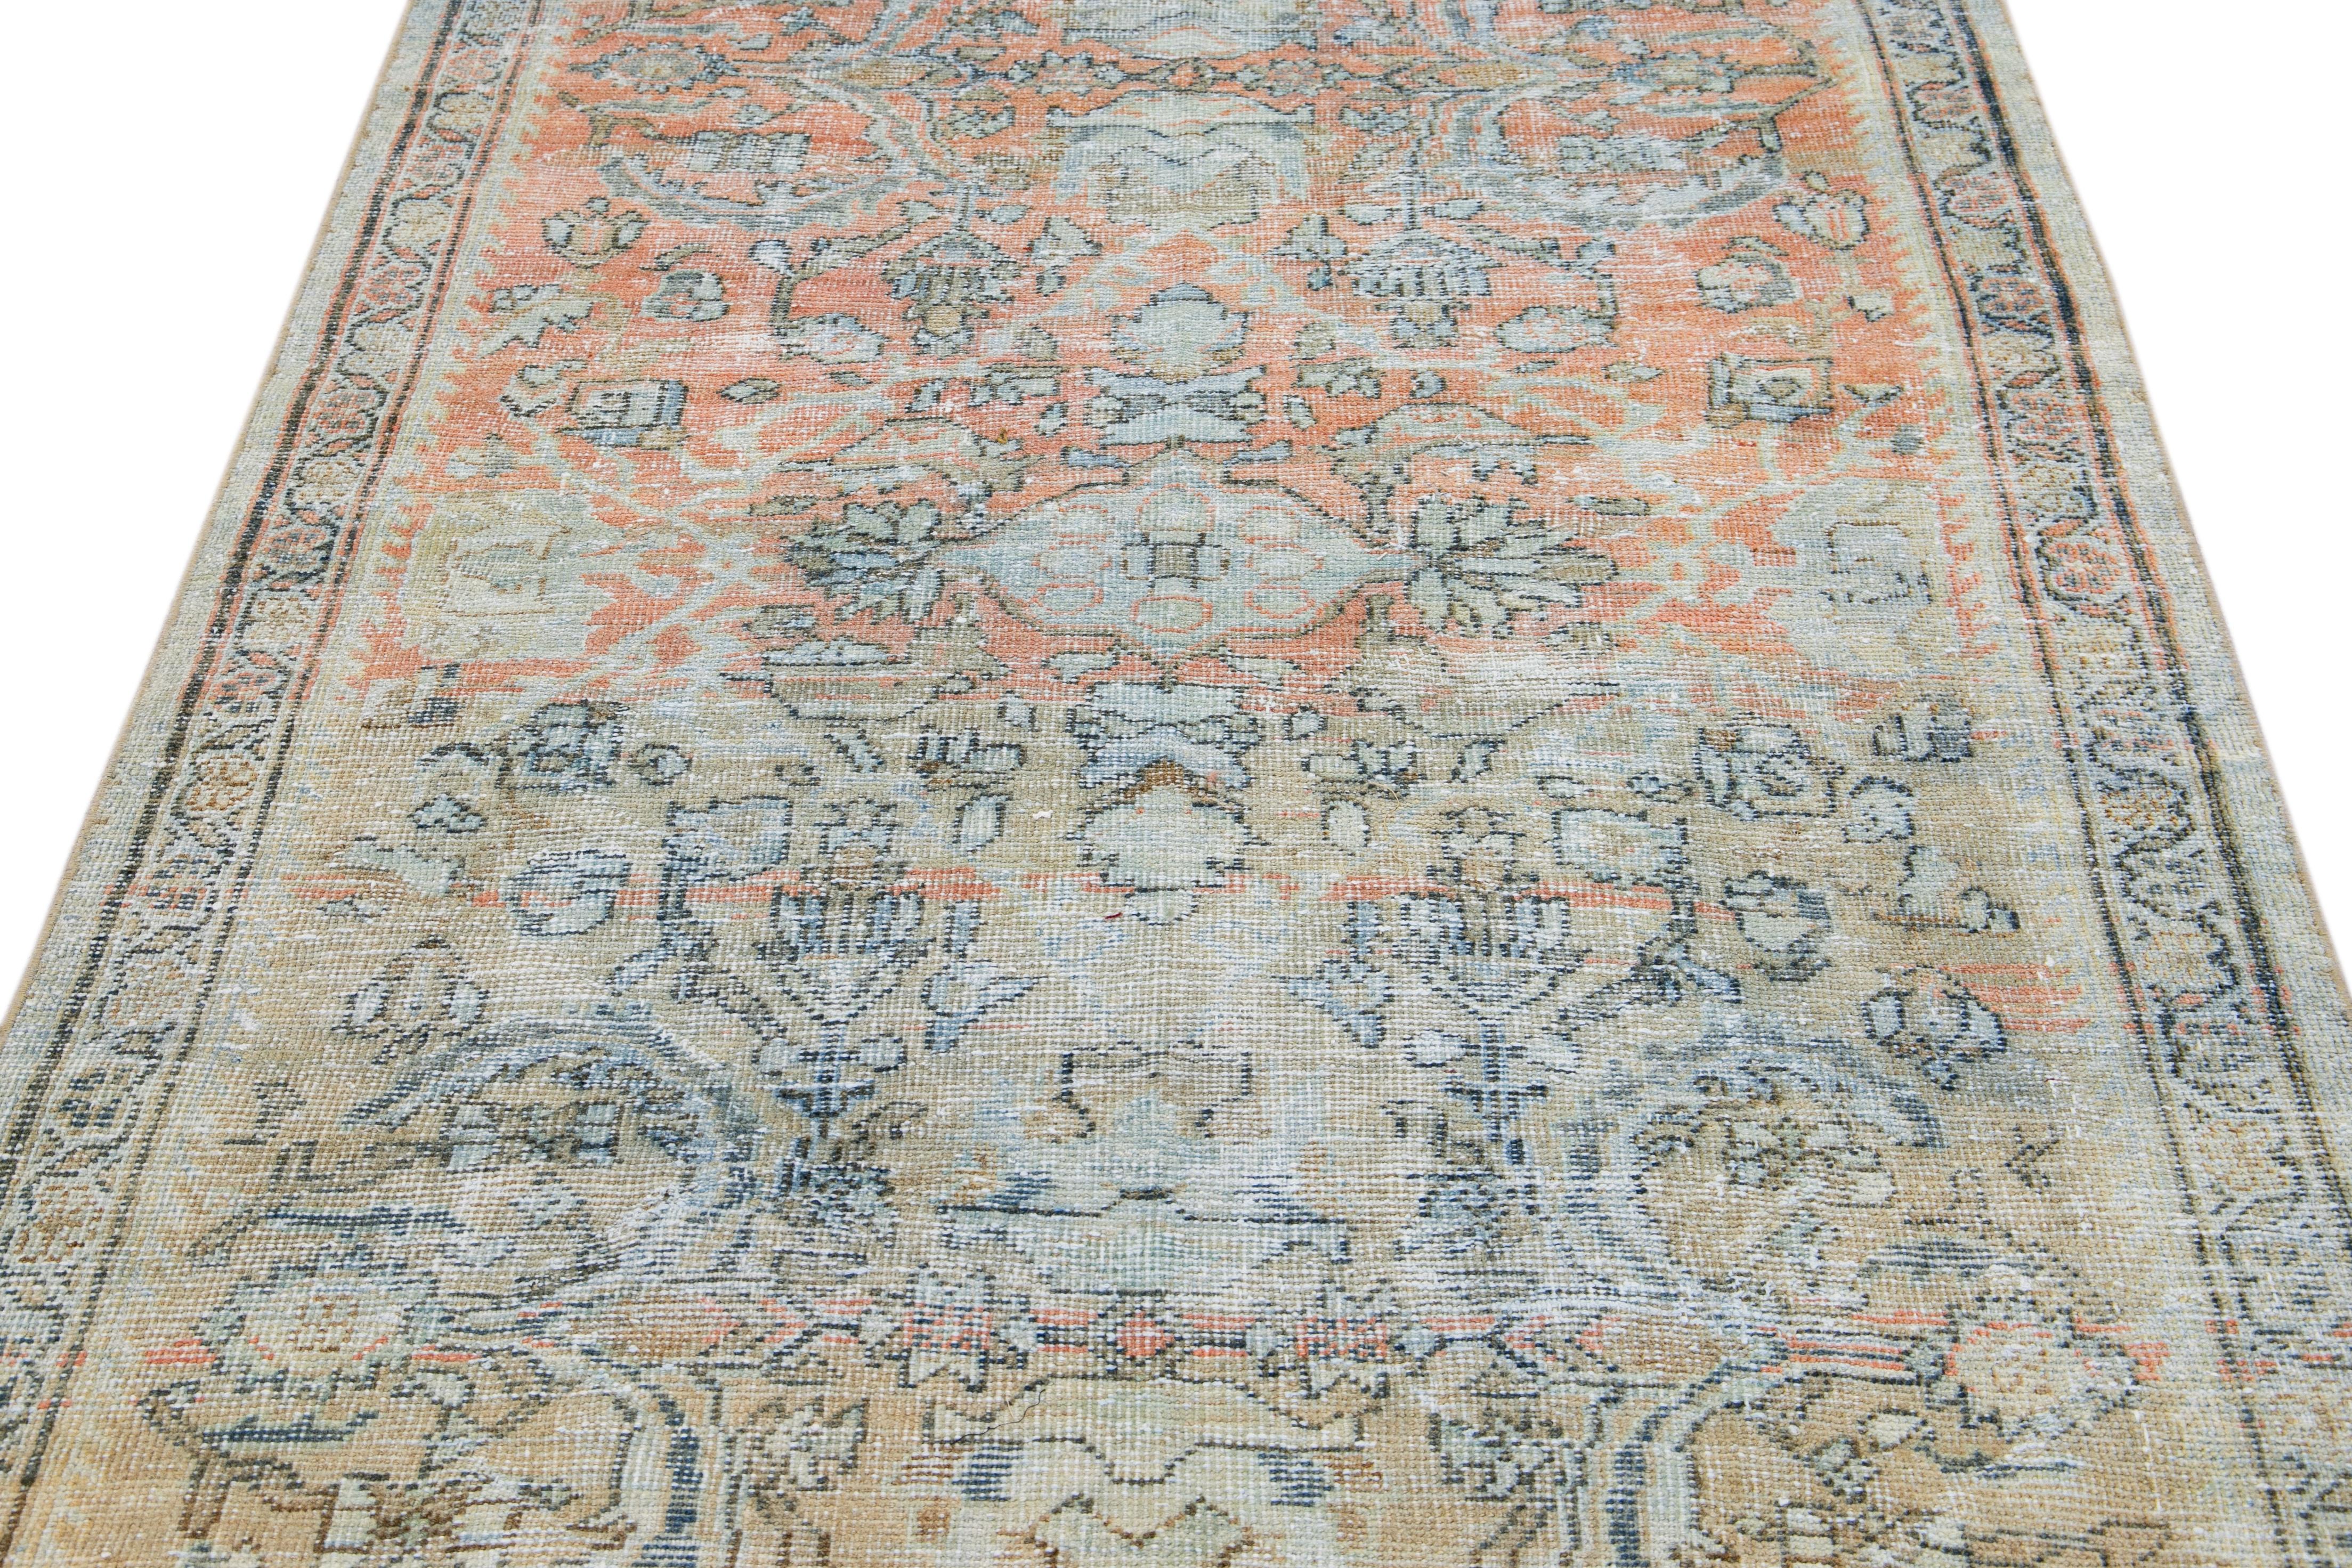 Islamic Antique Persian Mahal Handmade Floral Beige and Orange Wool Rug For Sale